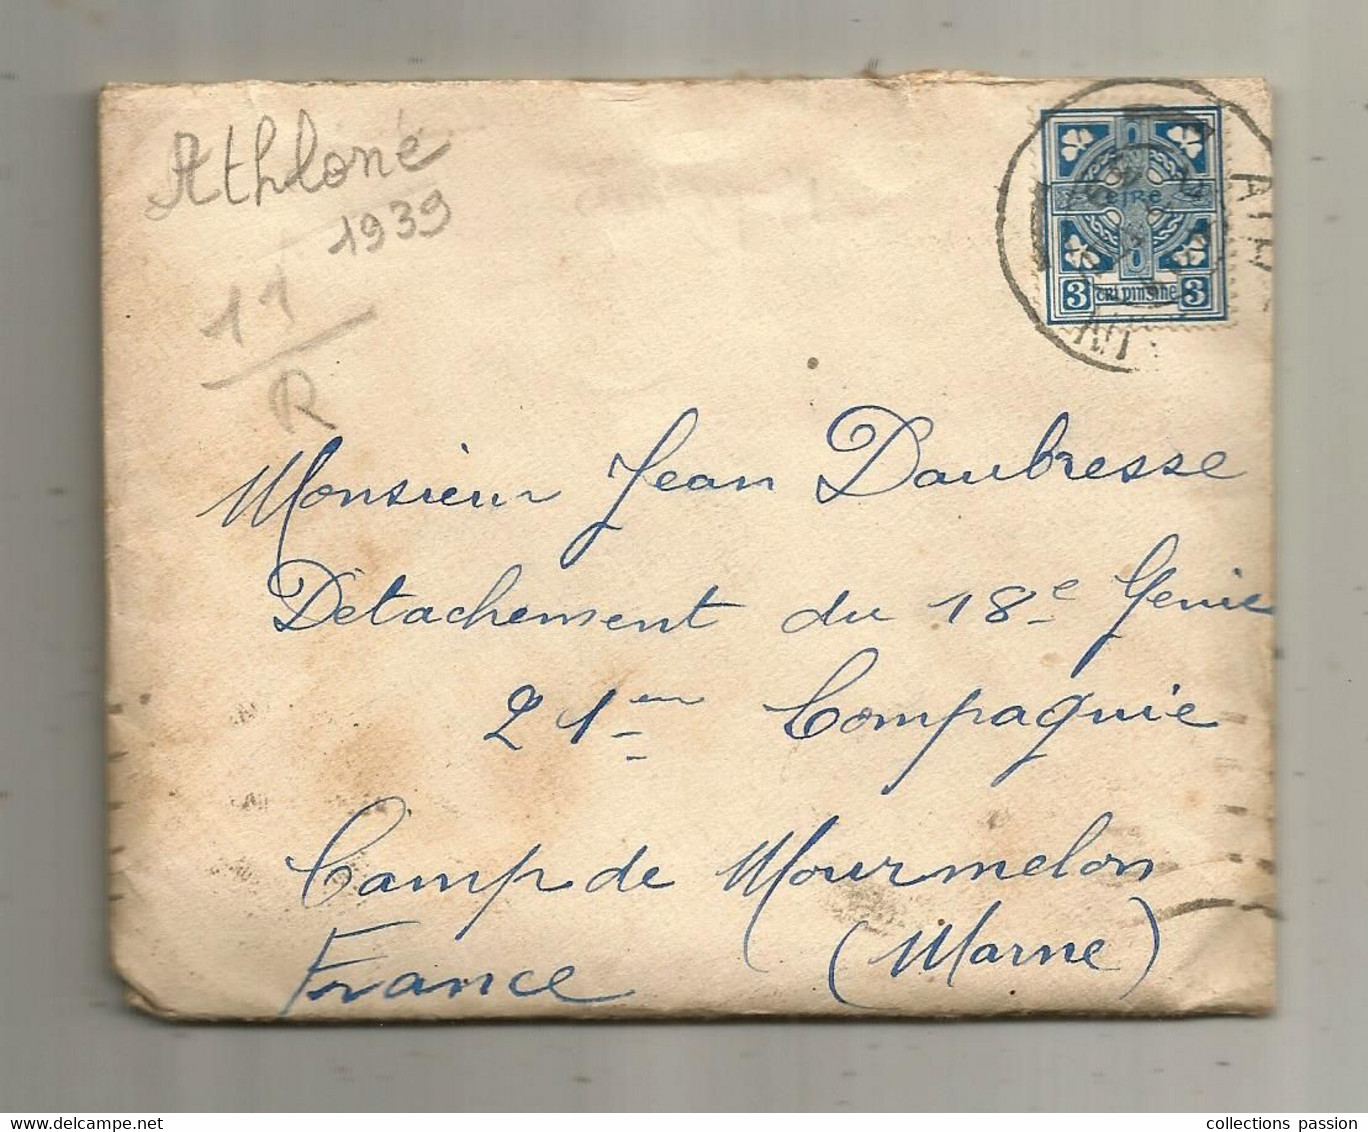 Lettre, Eire , Irlande , ATHLOME ,1939,MOURMELON LE GRAND ,MARNE, 3 Scans - Lettres & Documents